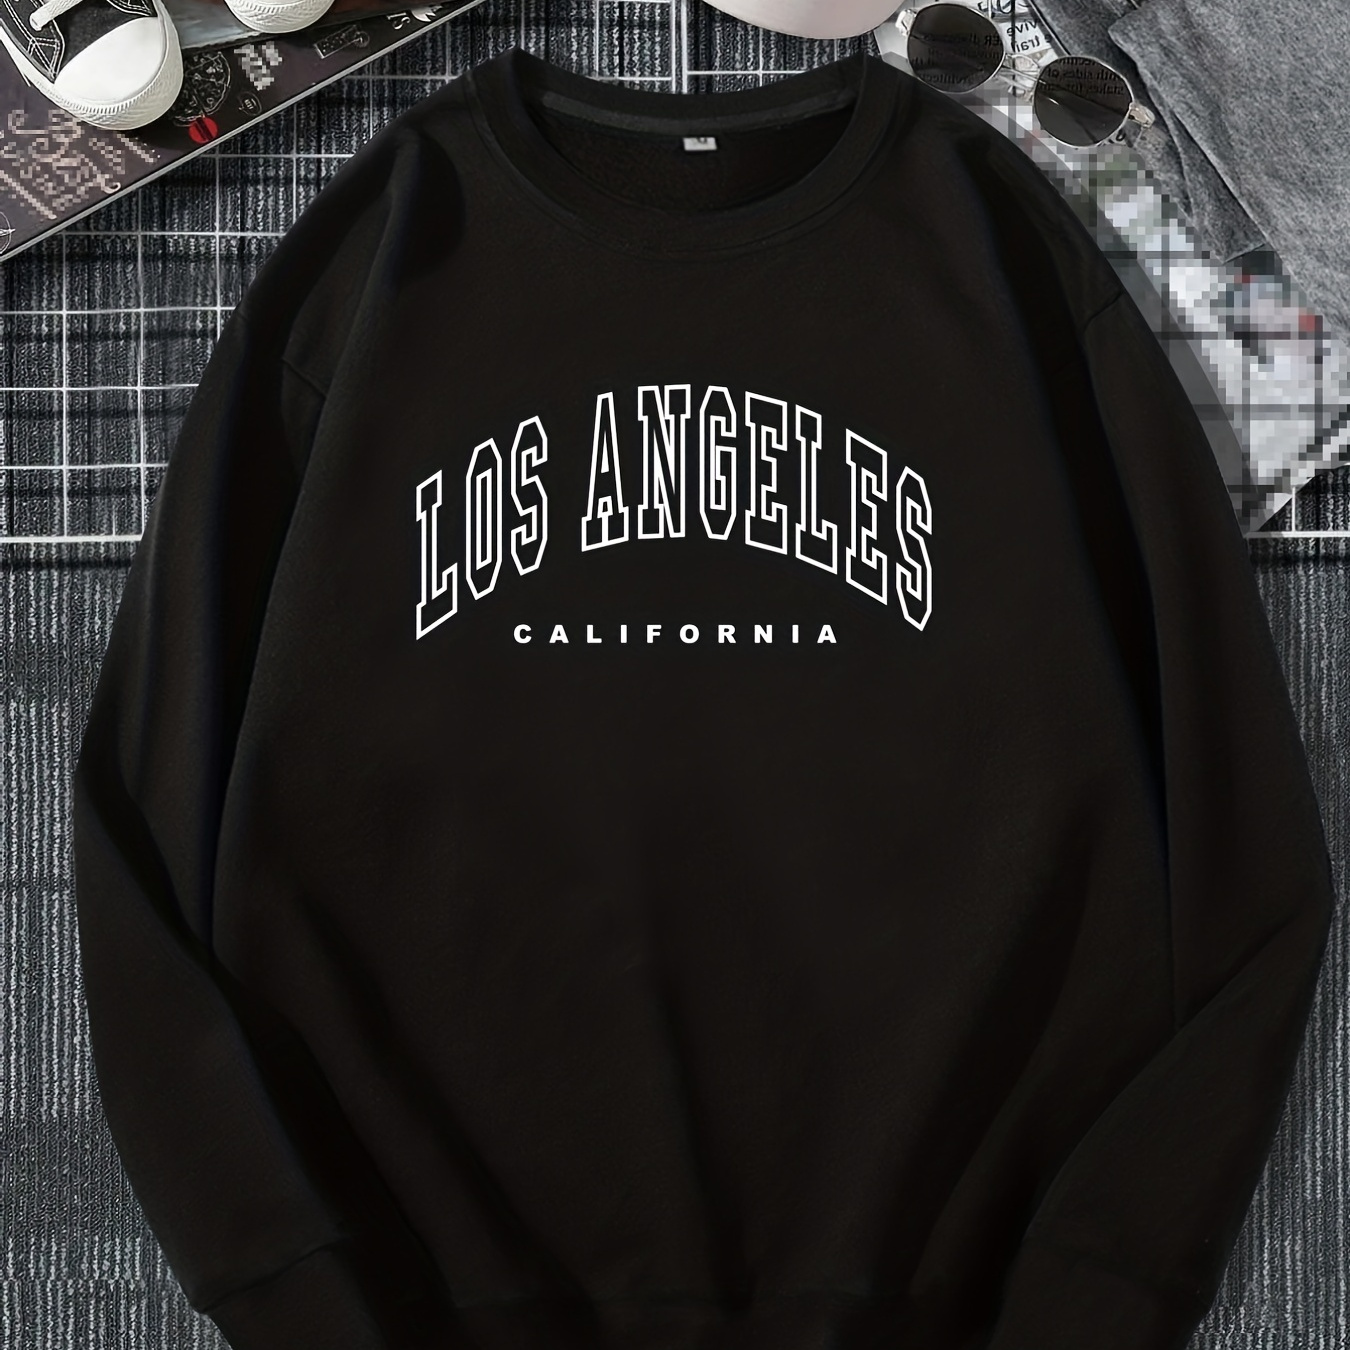 

Sweatshirt For Men, Los Angeles Letter Print Top, Men's Casual Pullover Sweatshirt For Spring Fall, As Gifts